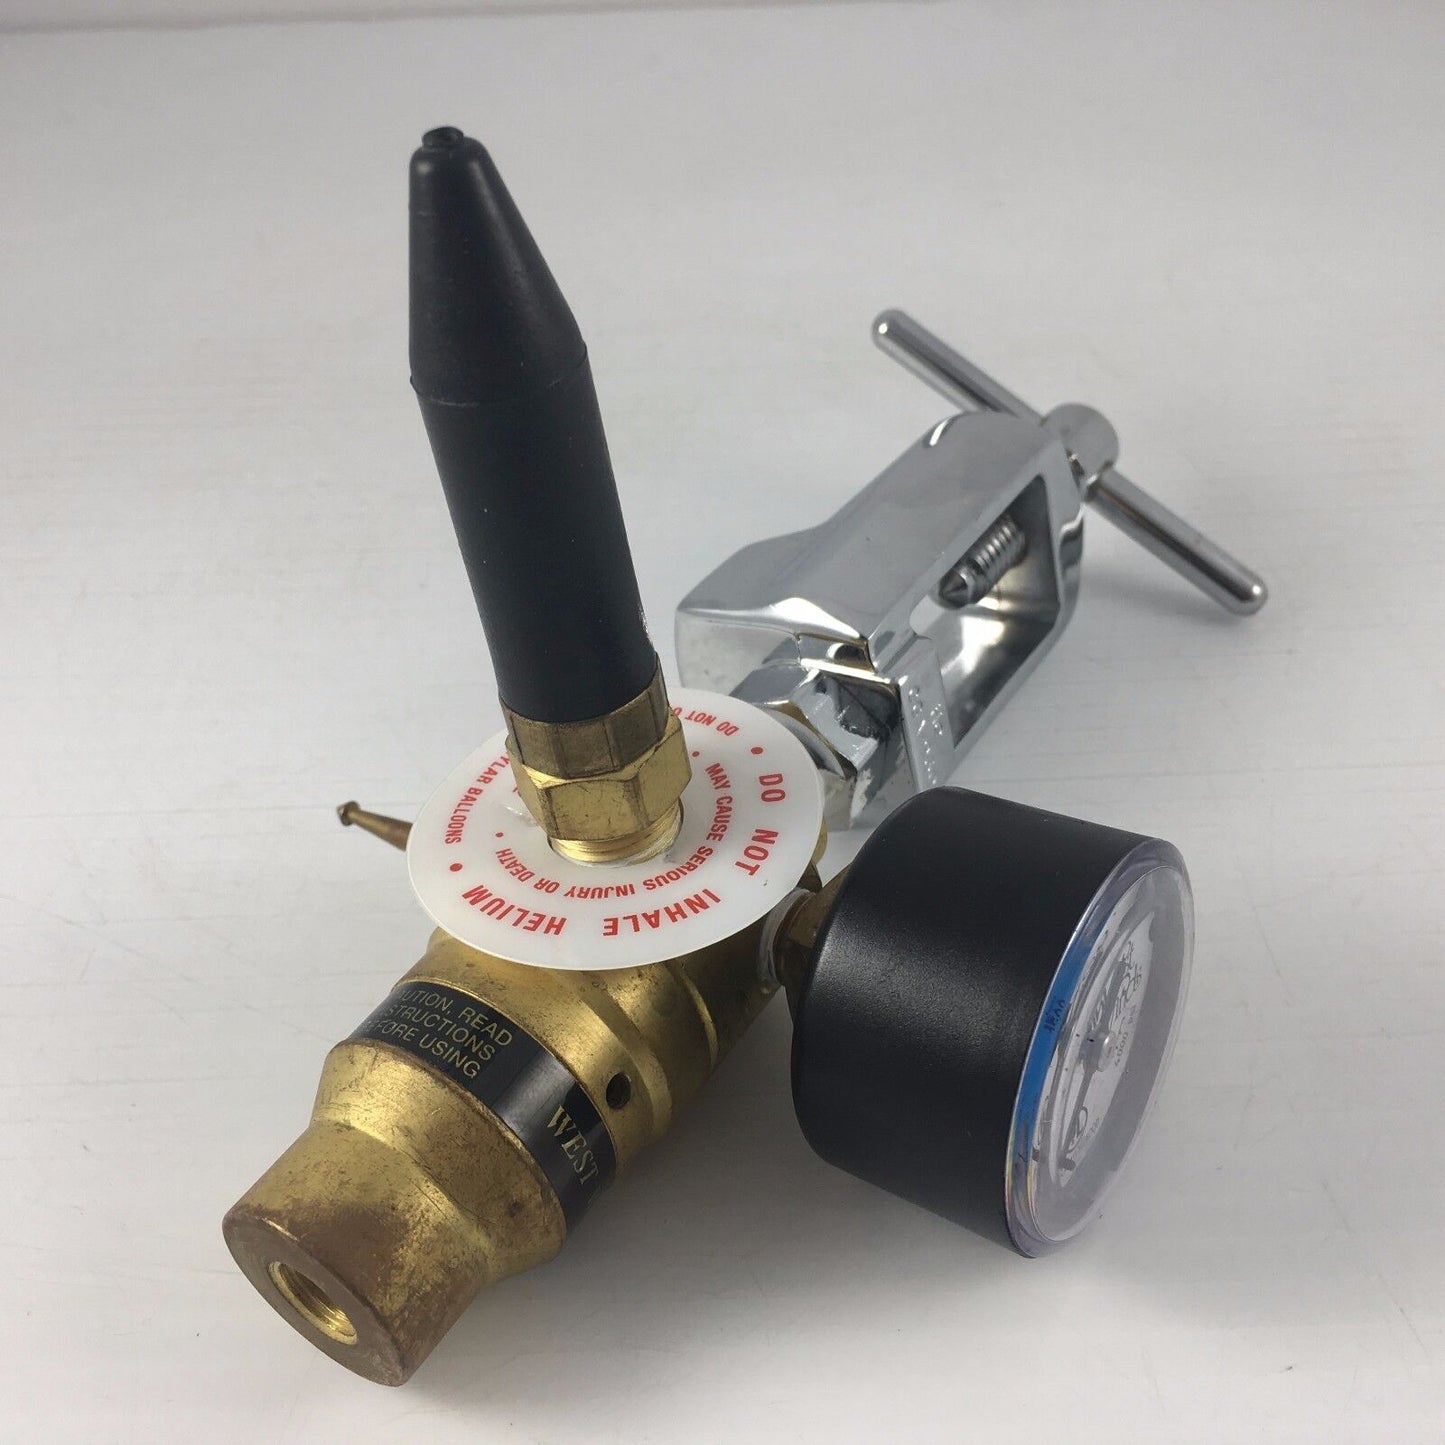 Compressed Gas Regulator West Winds for Helium Balloons 4000 Max PSI